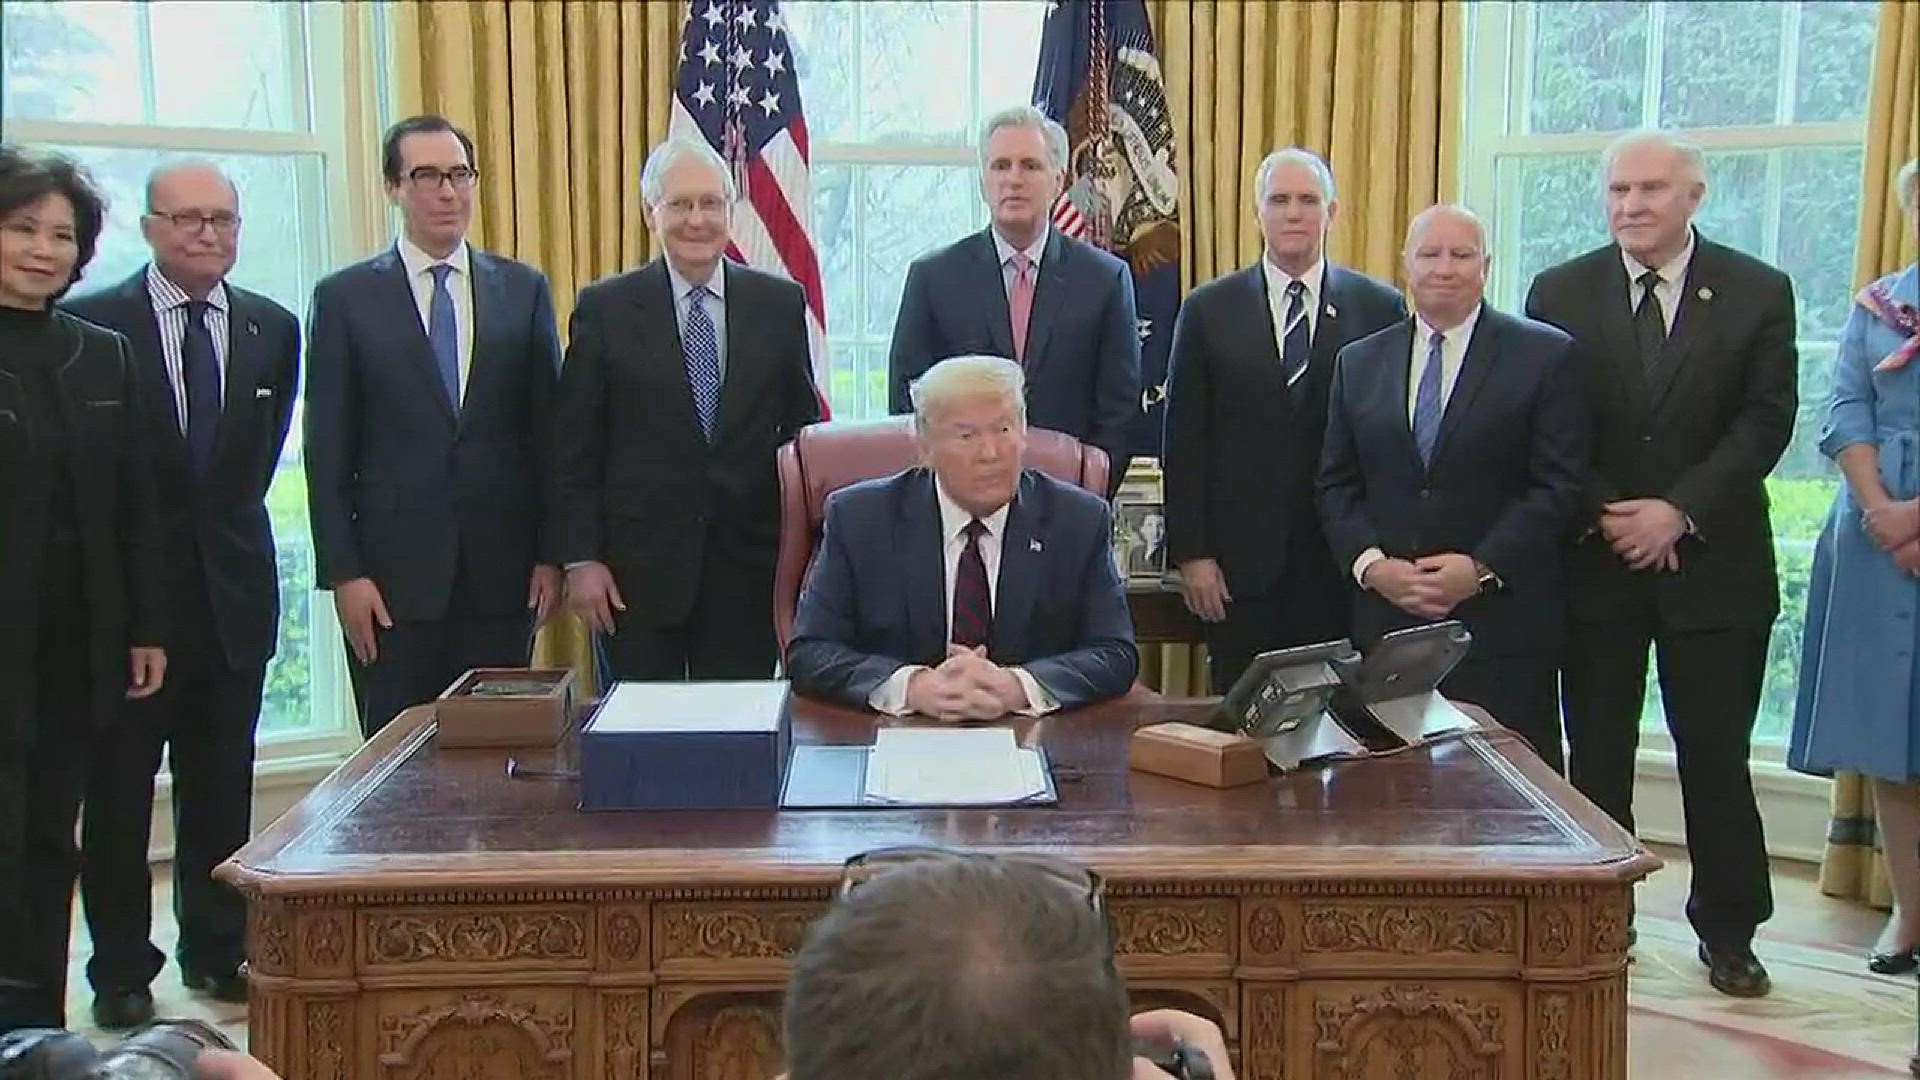 President Donald Trump on Friday signed the $2 trillion coronavirus economic stimulus bill in an Oval Office ceremony.